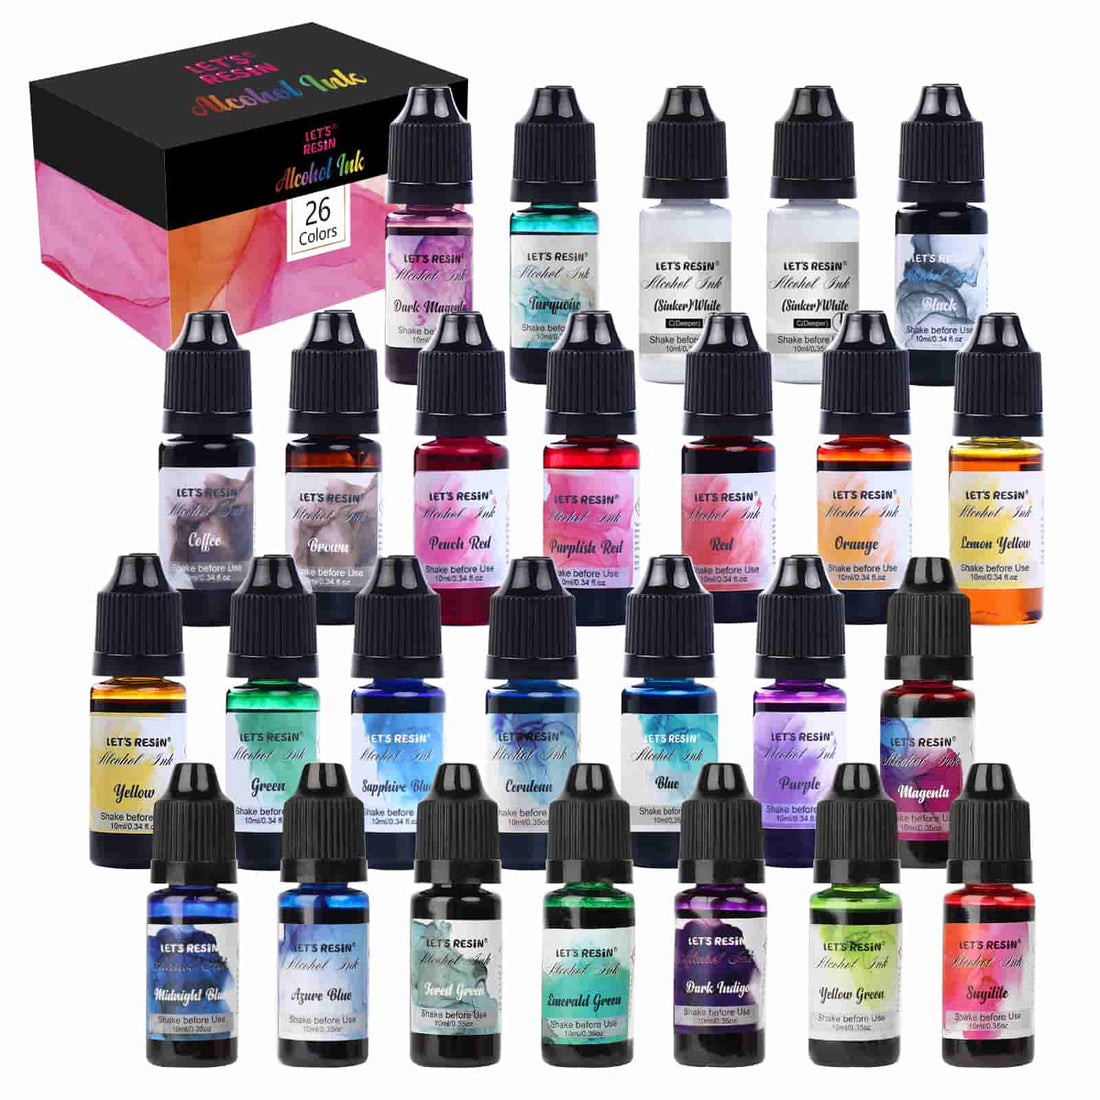 Neon Resin Tints - Pack Of 4 colors – ArtResin